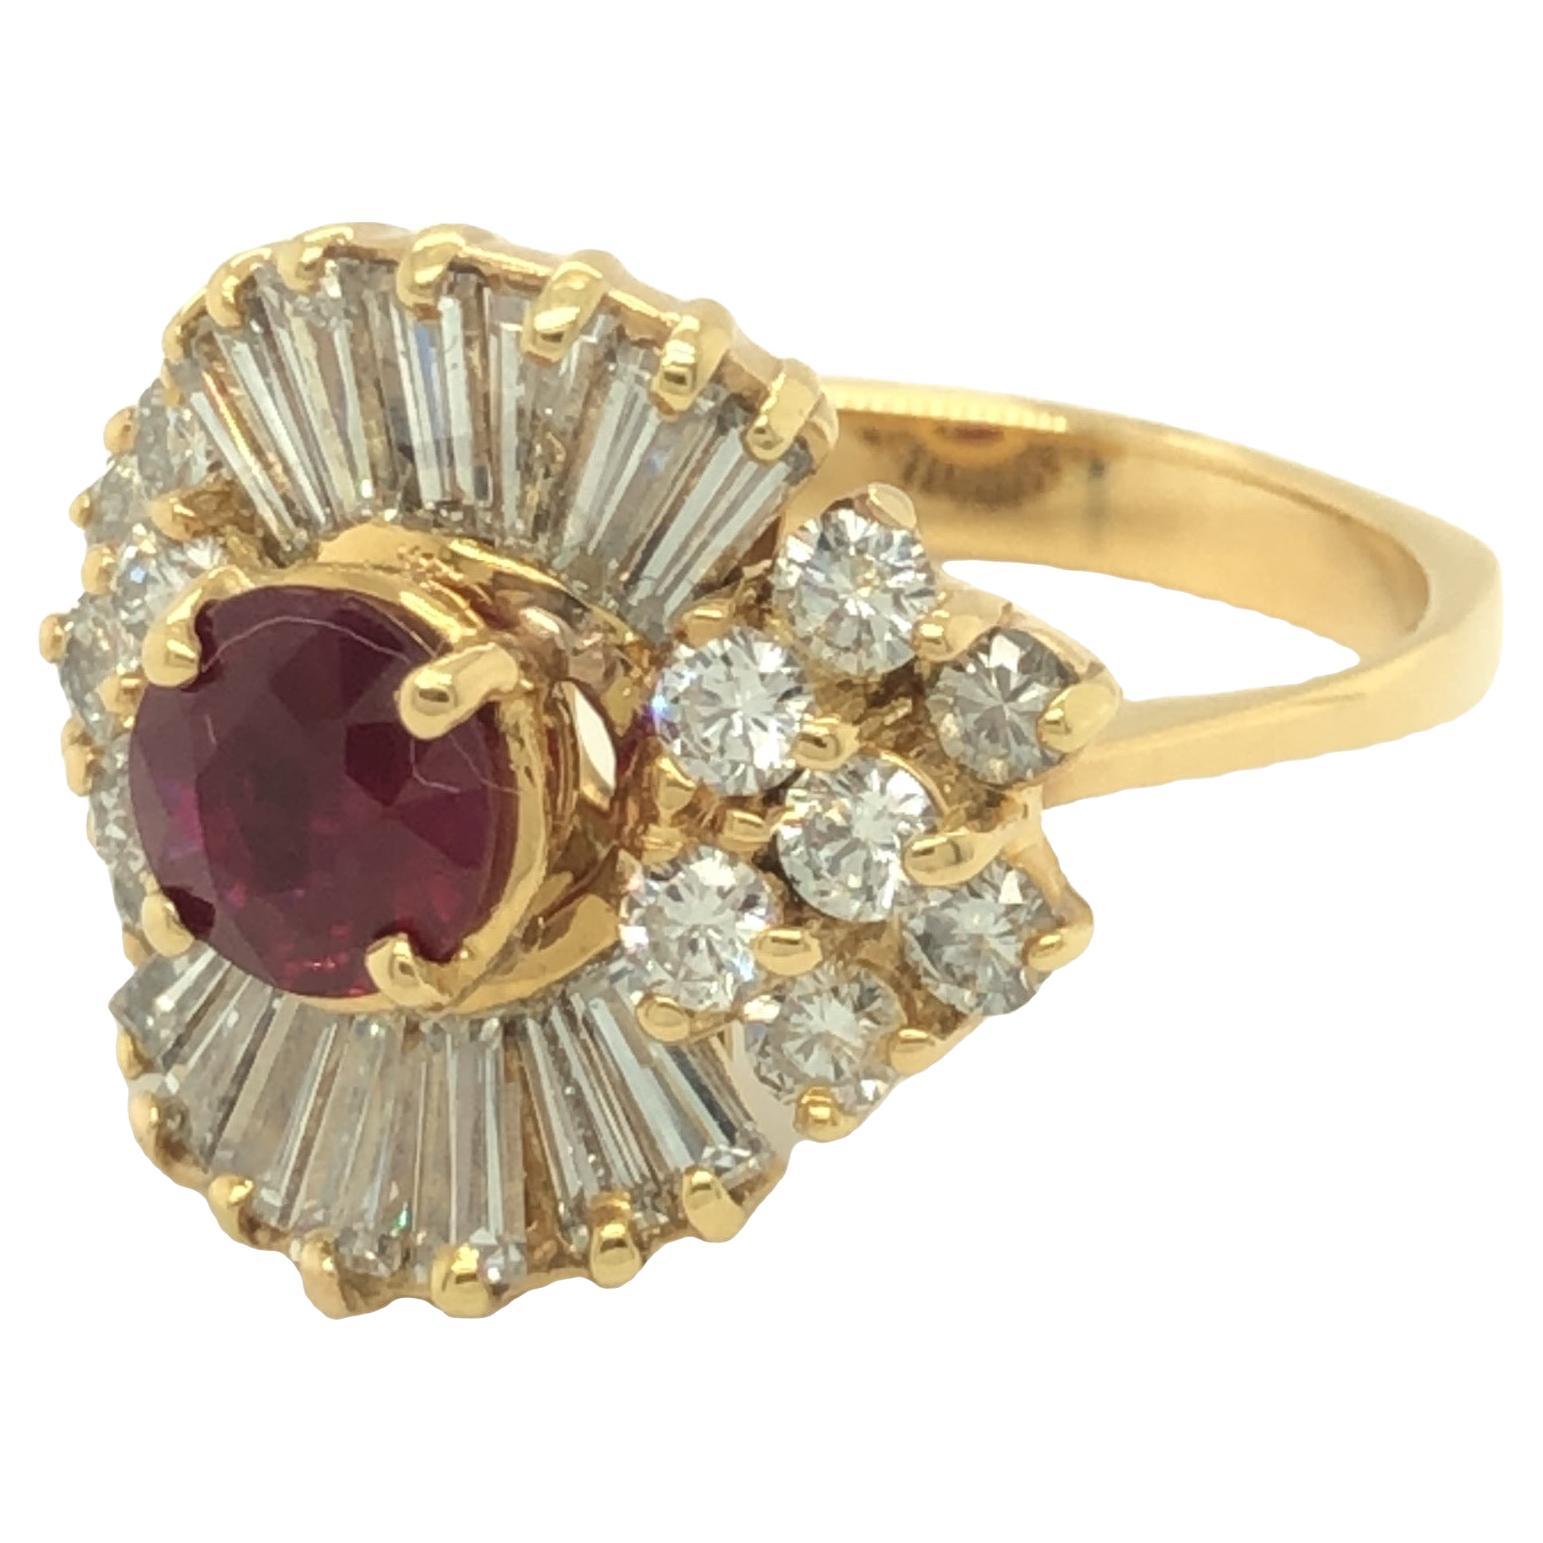 This ballerina ring is an old Hollywood glamour! GIA certified with a Burma ruby at center. The halo of fourteen round brilliant and fourteen tapered baguette cut diamonds are set in shimmering waves that resemble the gracefully ruffling skirt of a